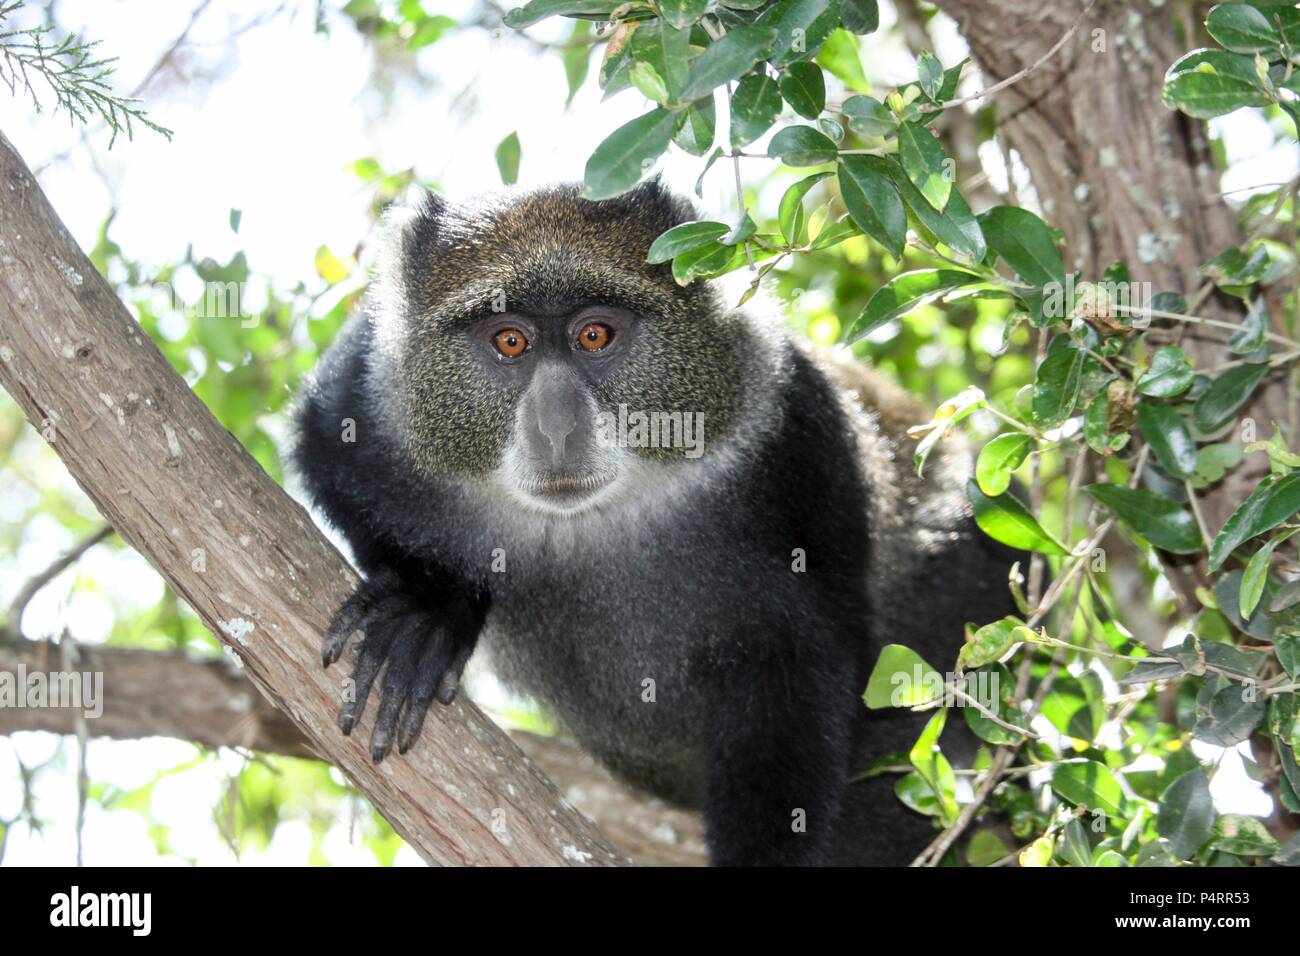 Blue, or samango, monkey (Cercopithecus mitis) in a tree. This monkey lives in troops, deferring to a dominant male (seen here). This primate is quiet and shy, living in the treetops of tropical African forests. It feeds on fruit, leaves and arthropods. Photographed in Tanzania. Stock Photo